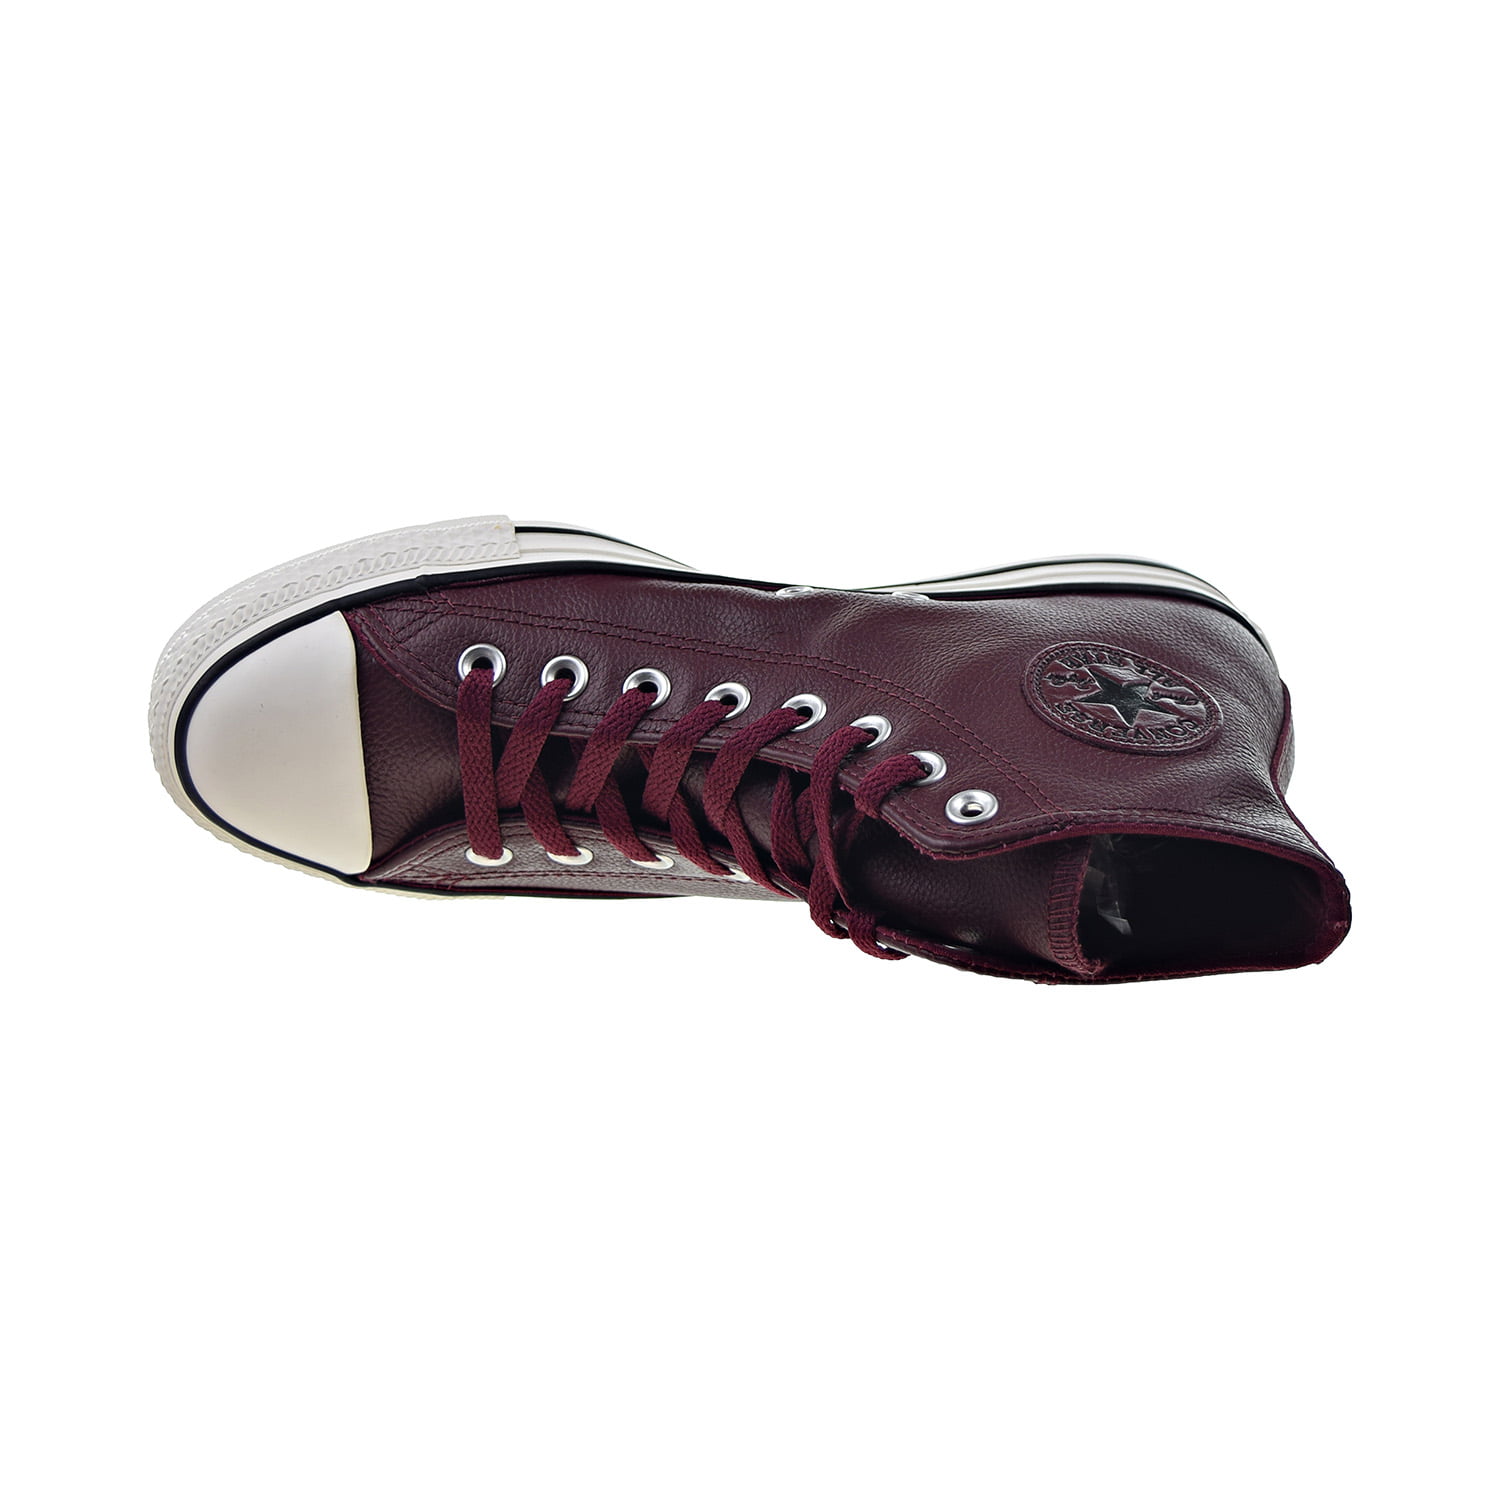 Converse Chuck Taylor All Star Hi Men's Leather Shoes Burgundy 161494c -  